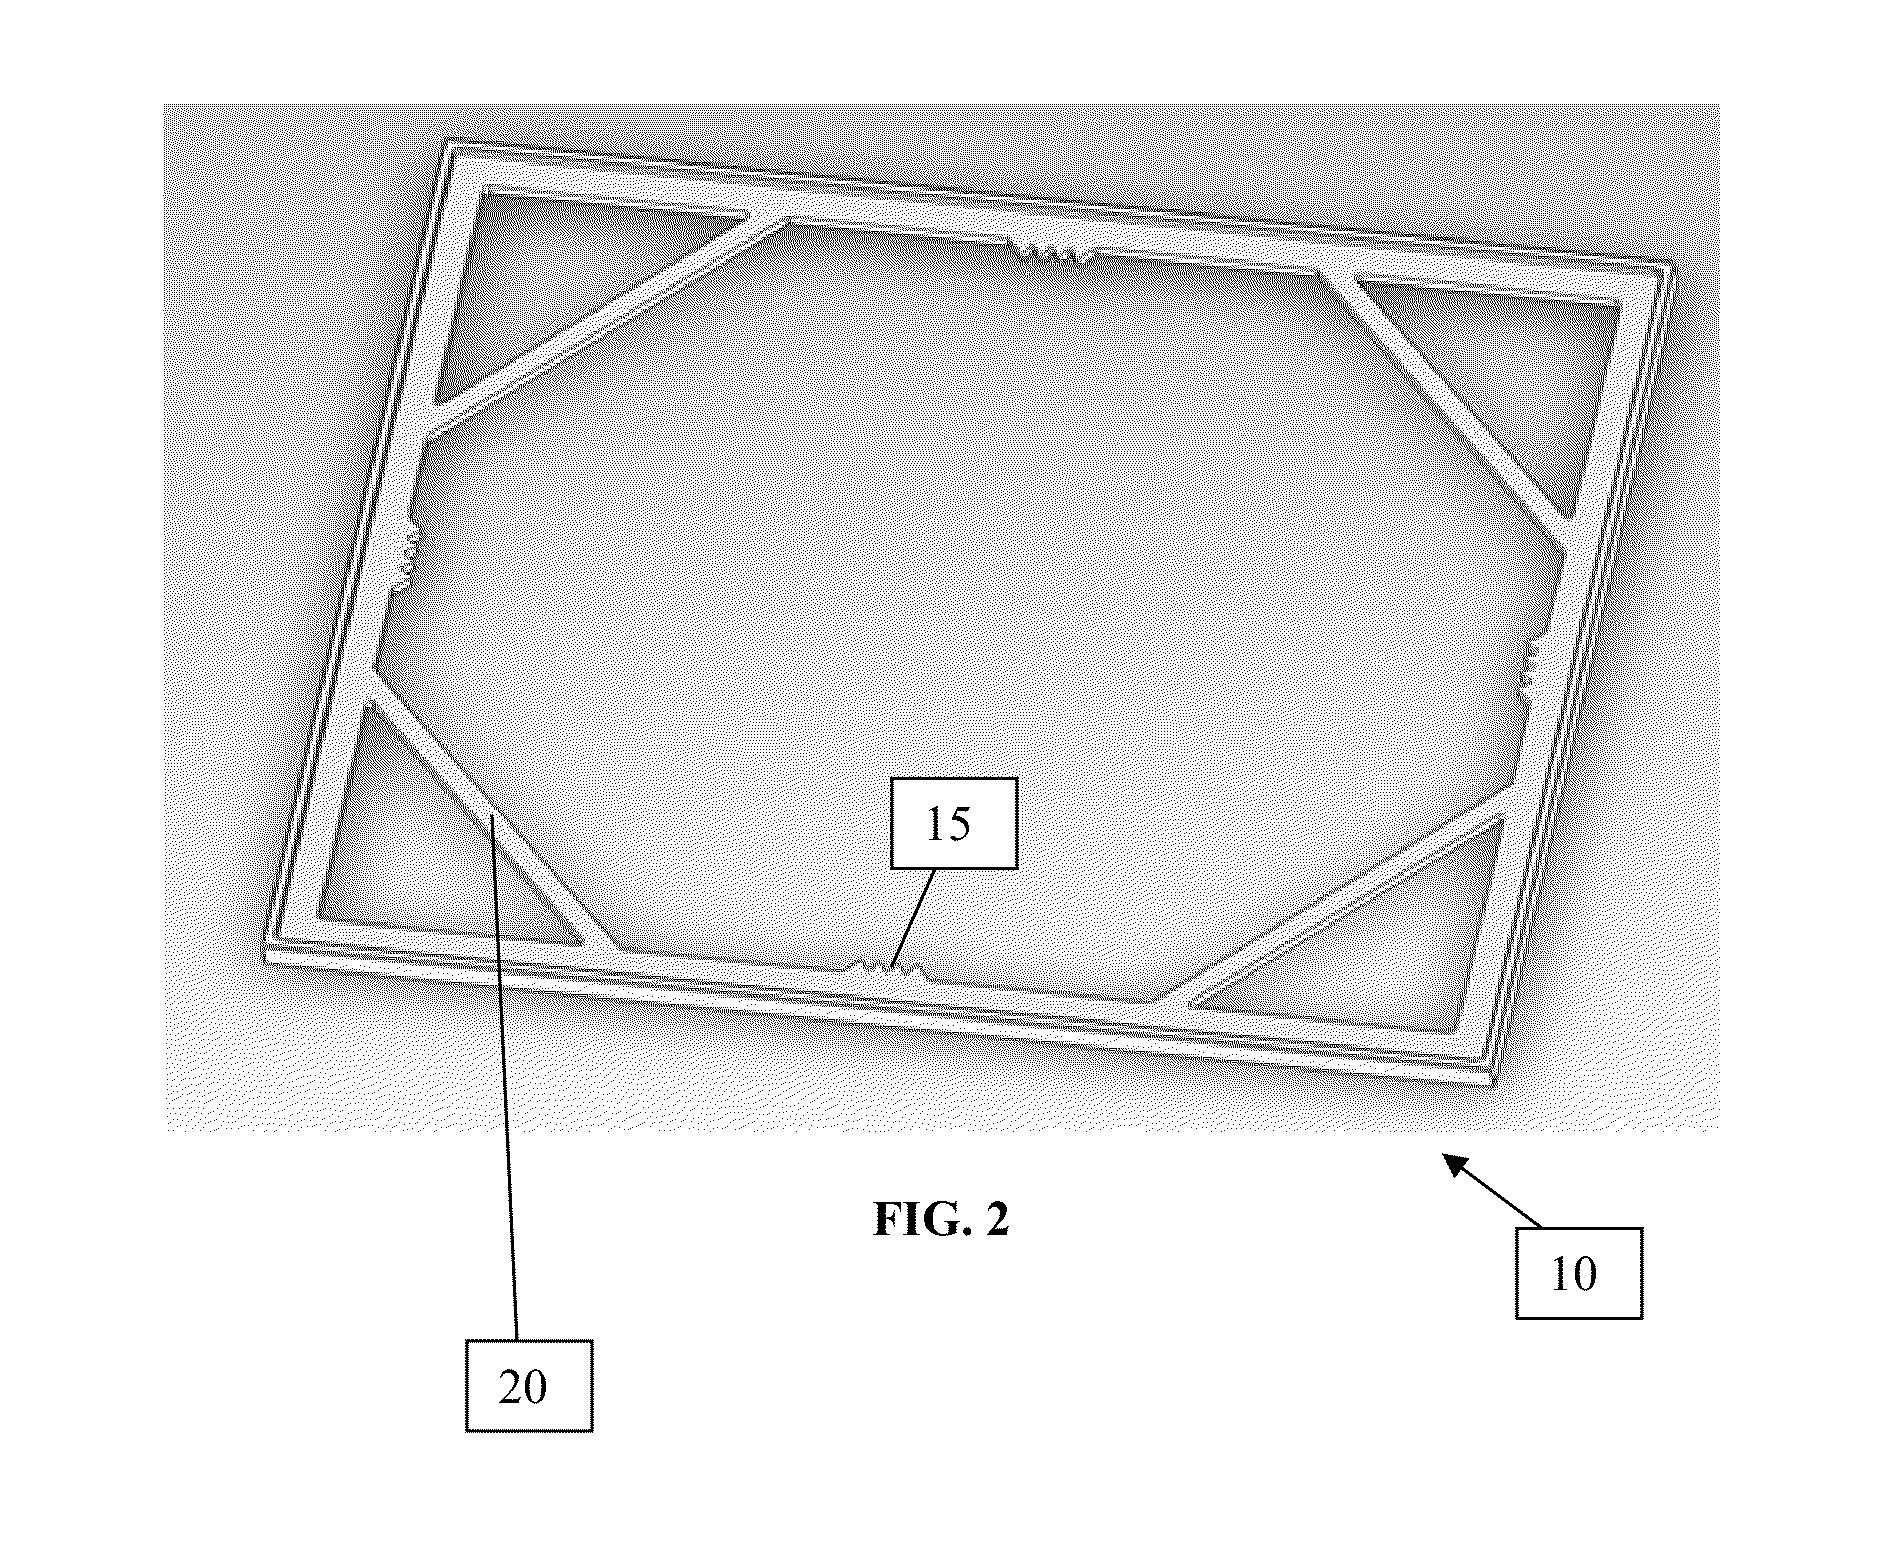 Display Frames and Methods For Display